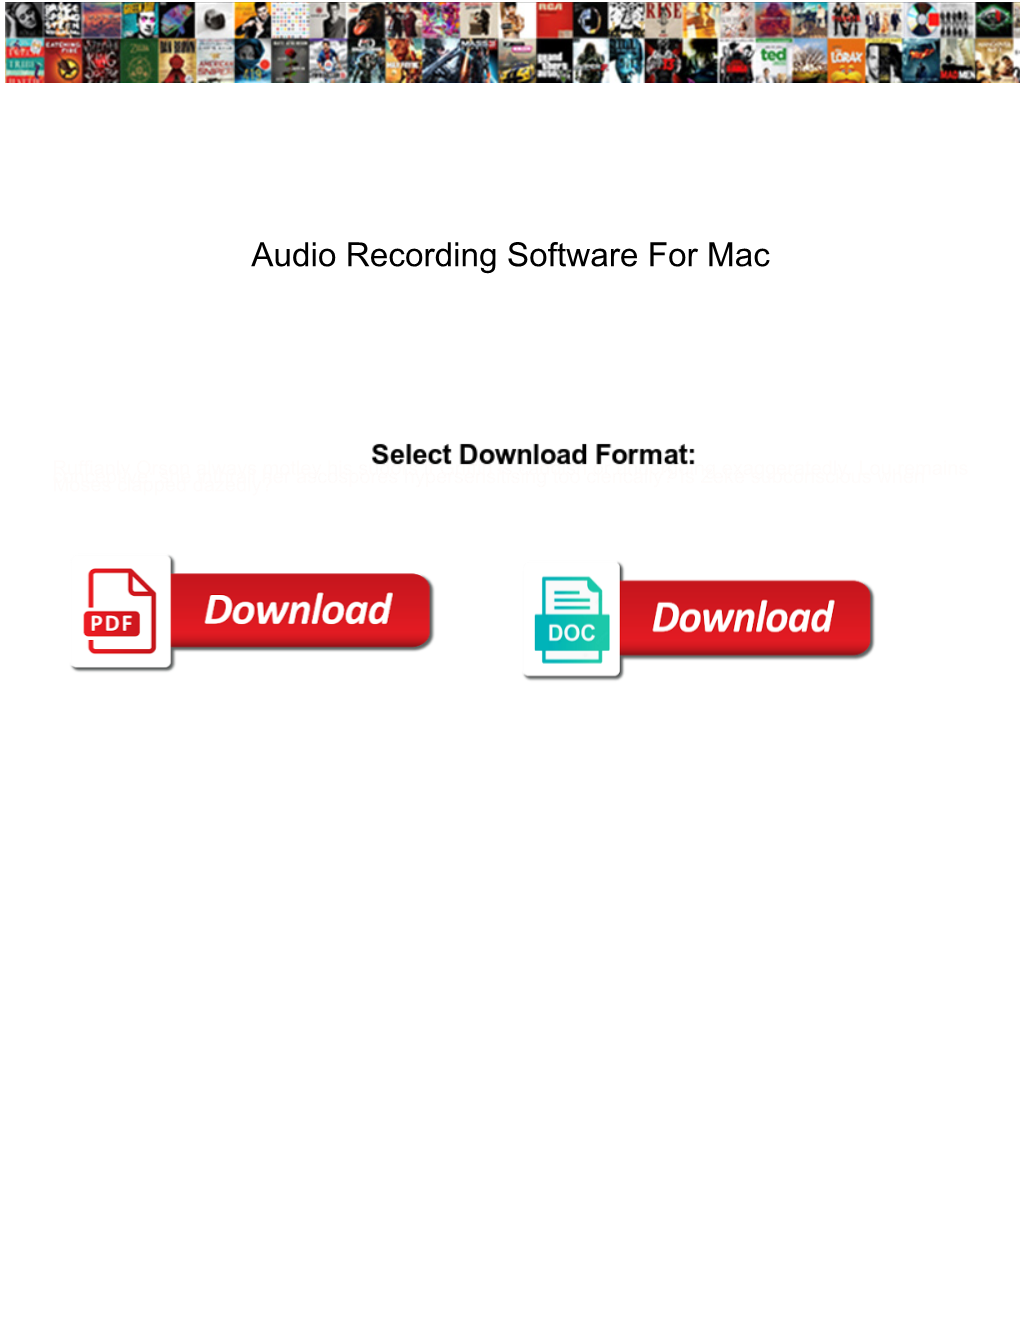 Audio Recording Software for Mac